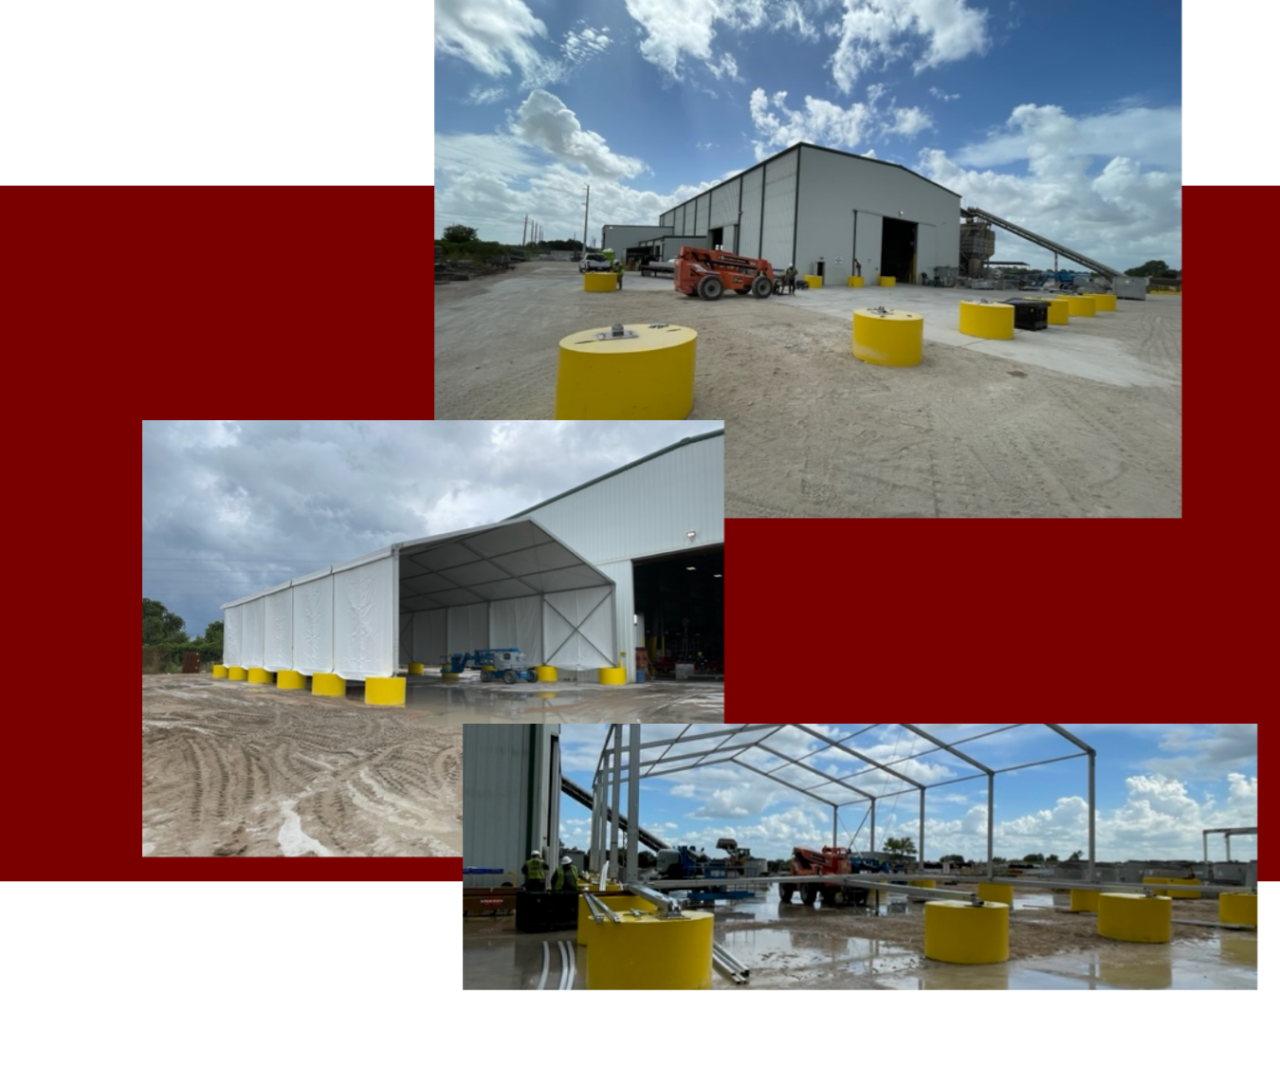 Clearspan tent structures used for temporary warehouse storage on construction sites by Industrial Tent Systems